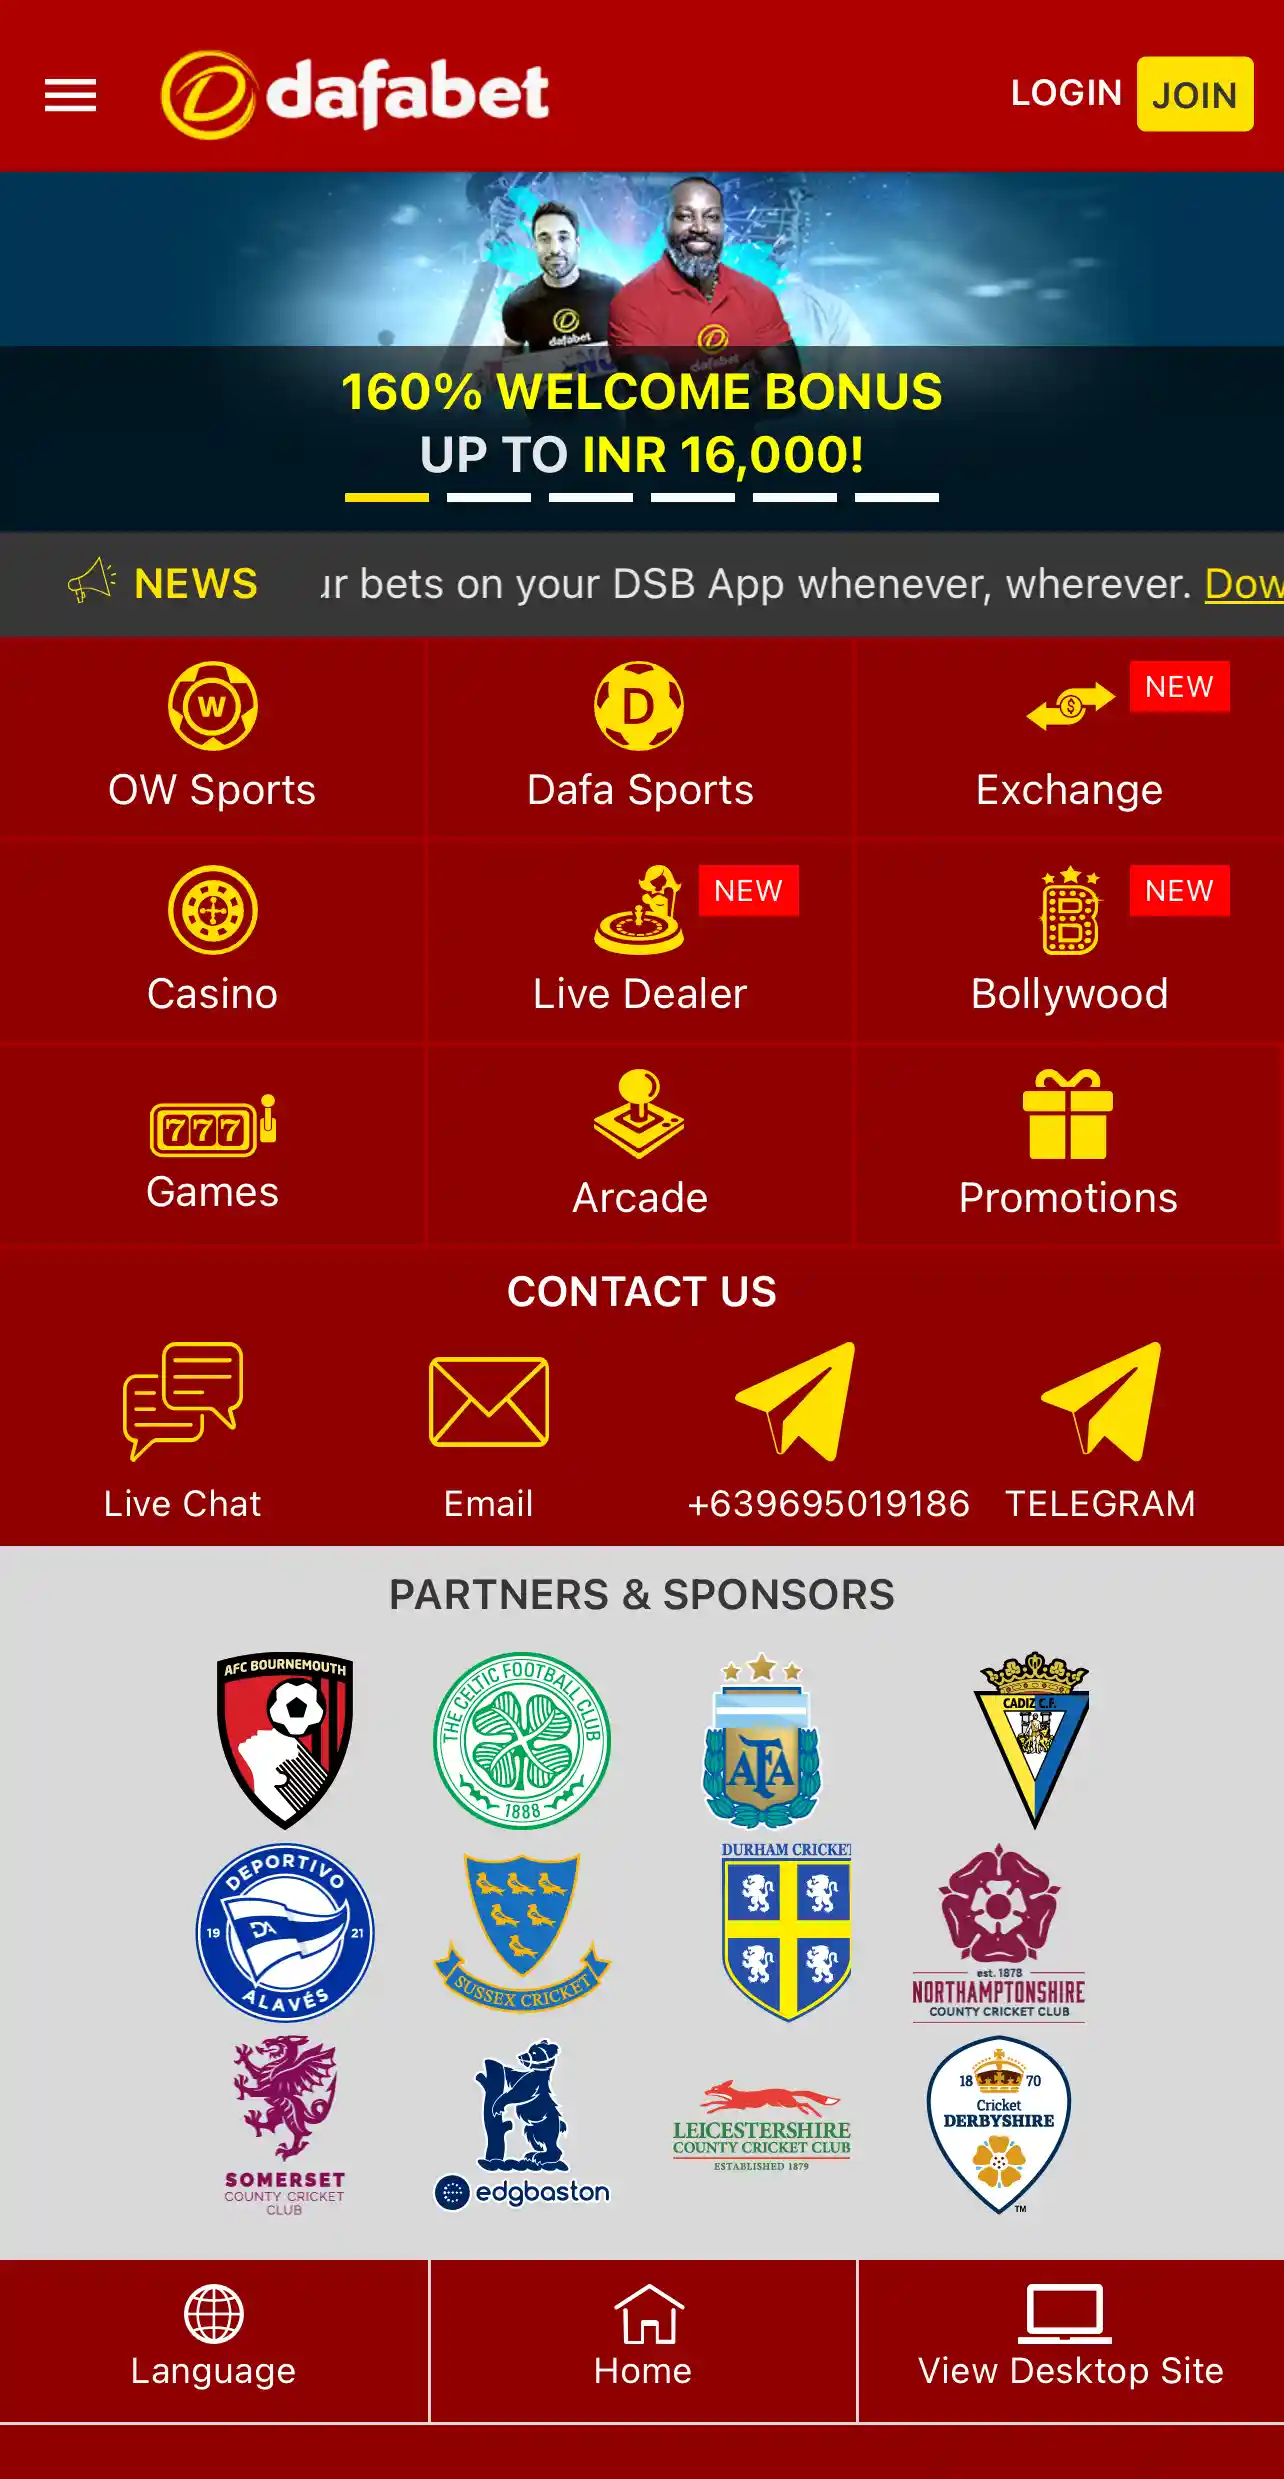 Home page of the Dafabet app for sports betting and casino games.